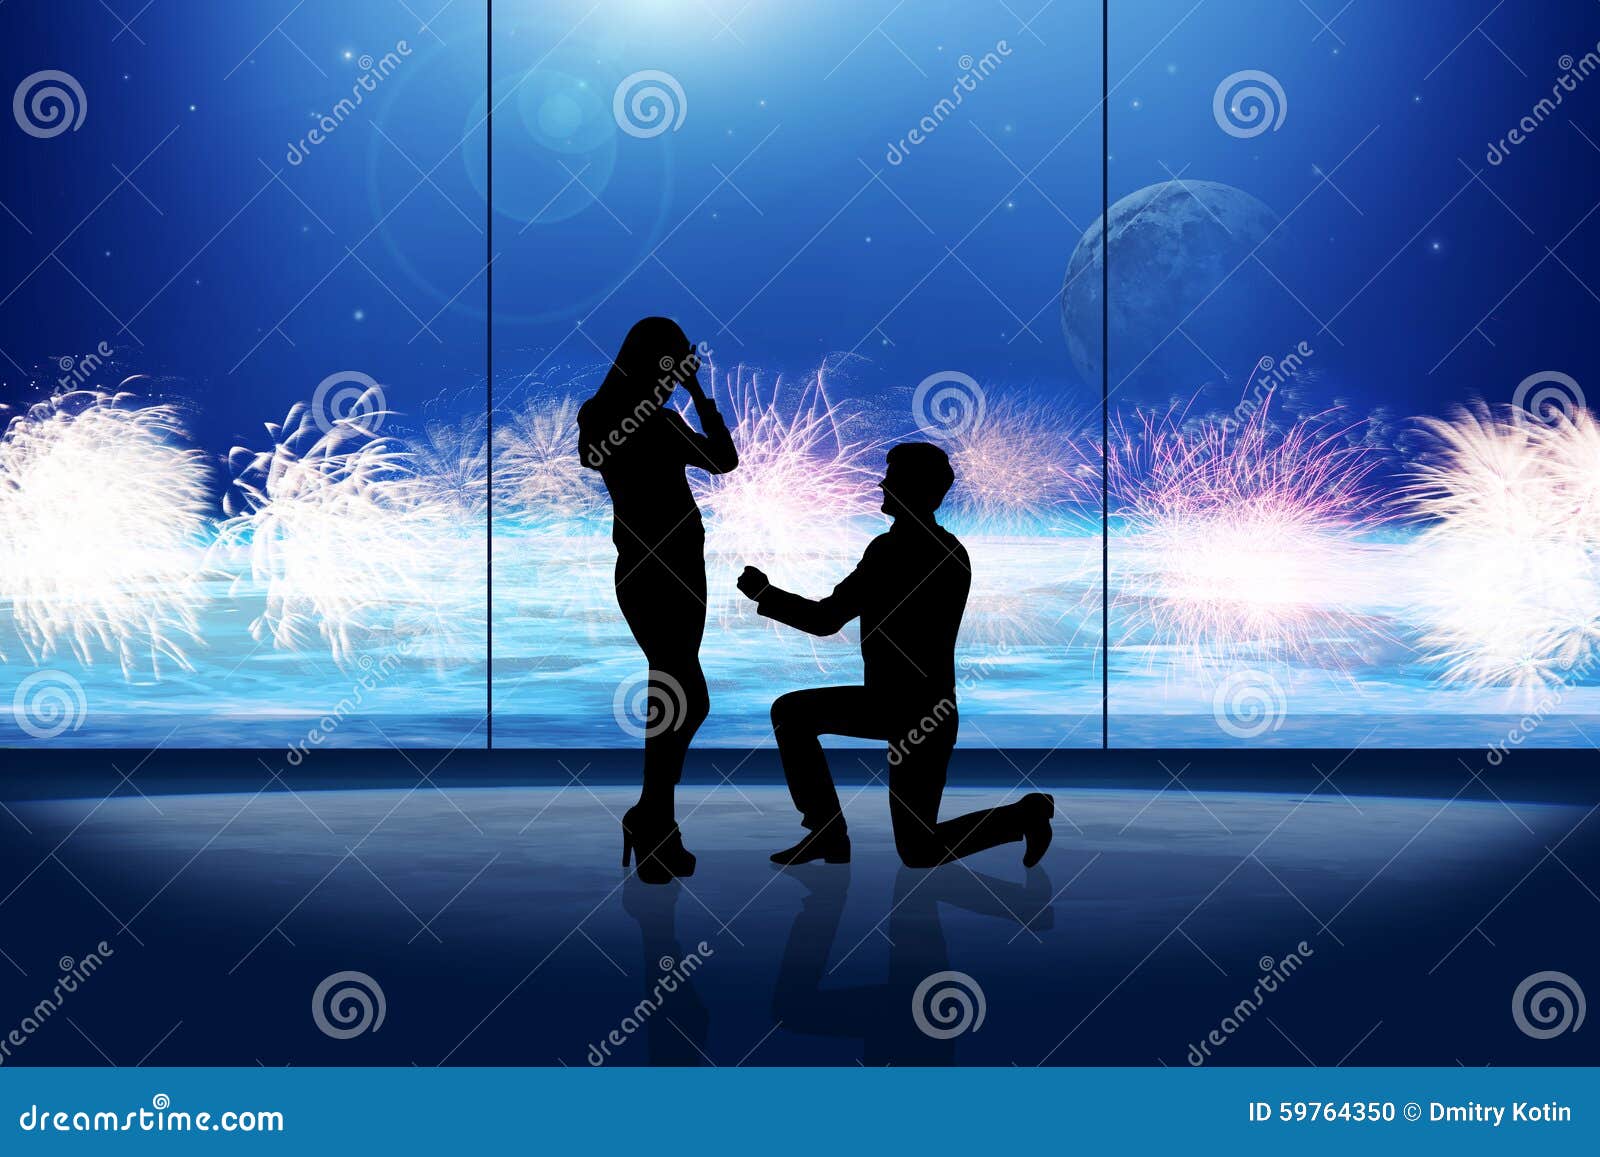 https://thumbs.dreamstime.com/z/man-makes-proposal-to-woman-silhouette-silhouette-space-room-59764350.jpg